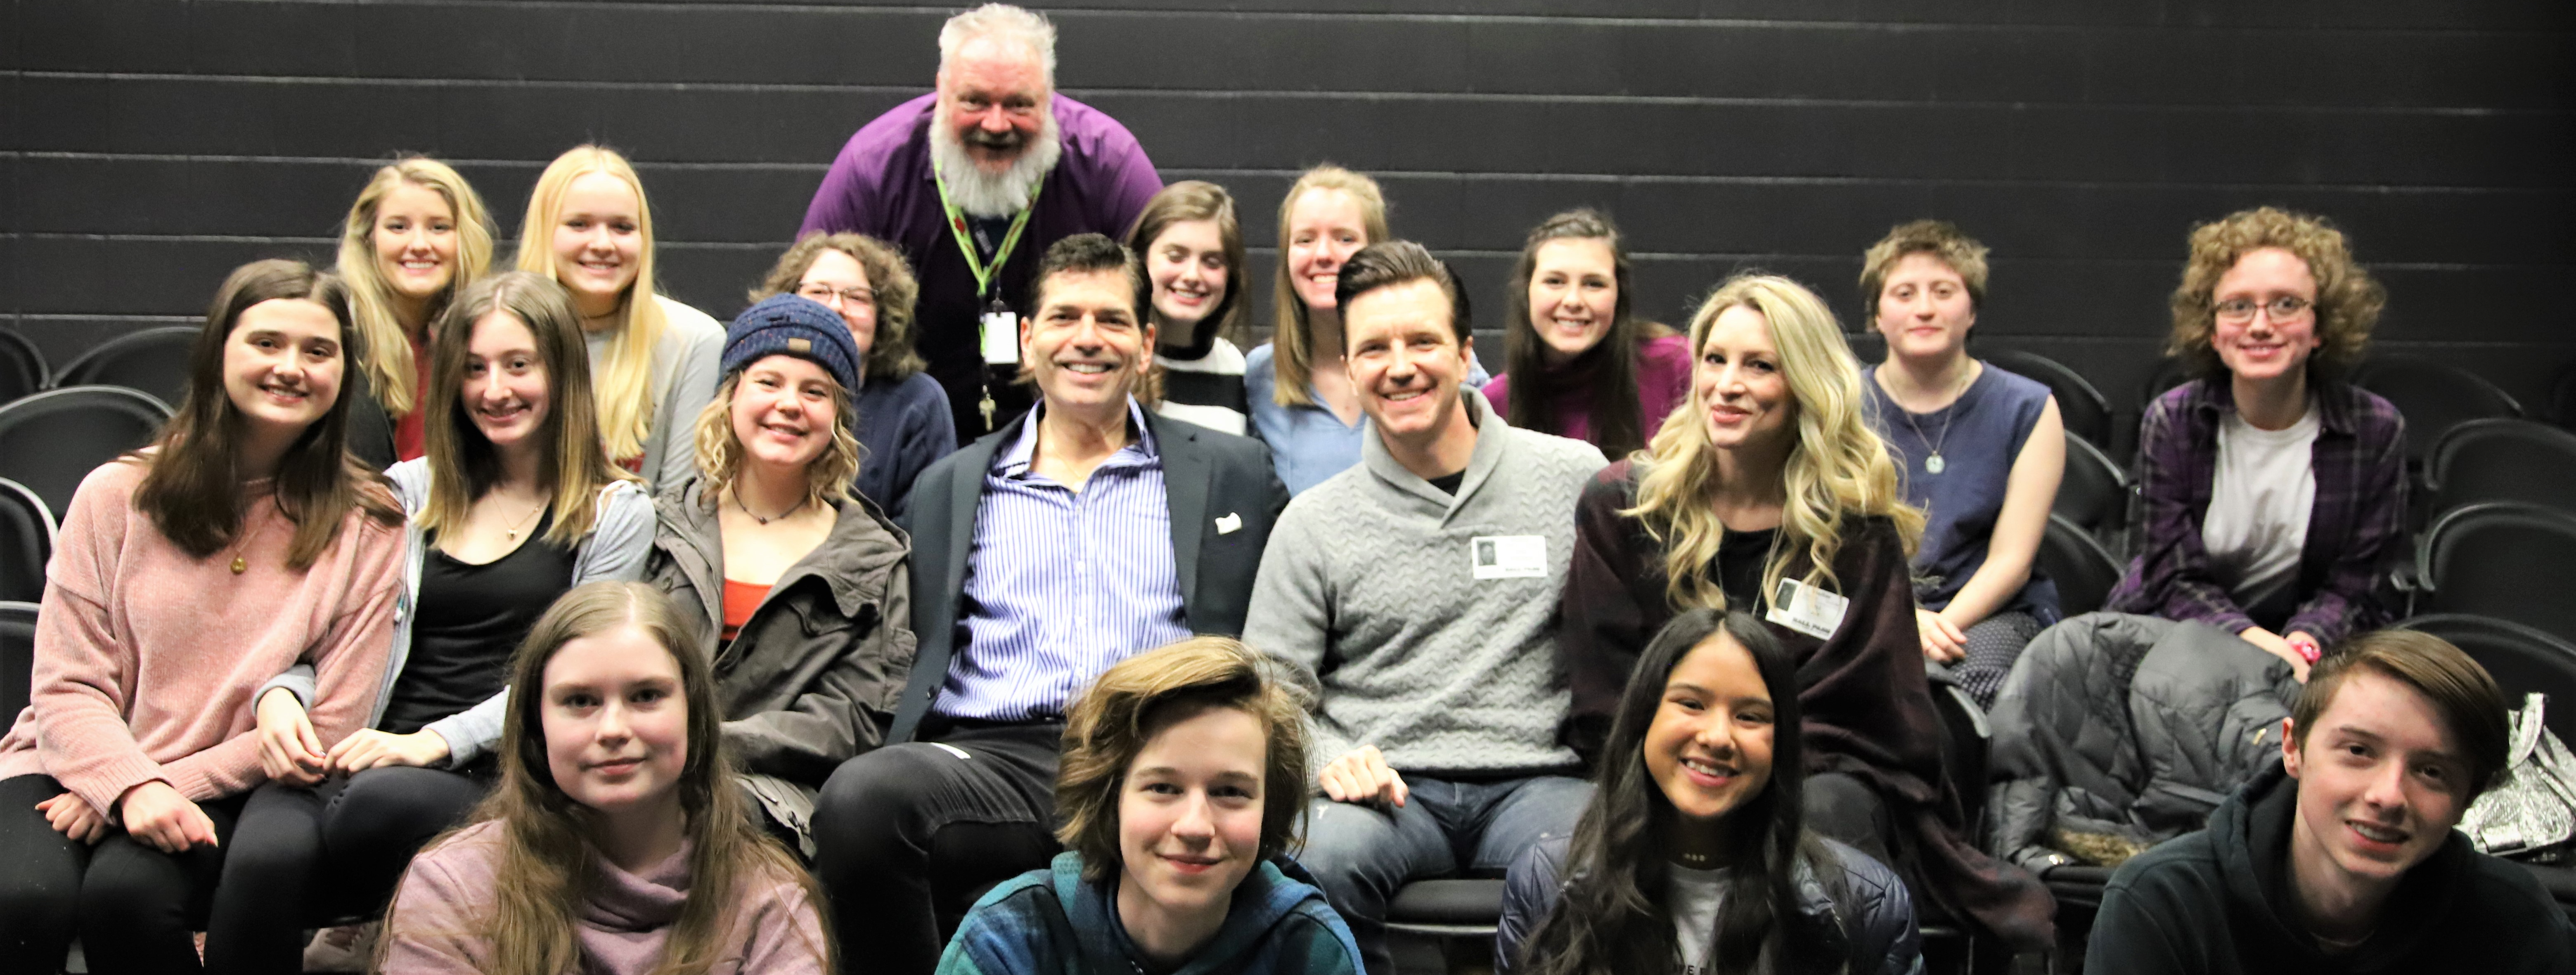 Theatre students get a visit from Broadway actors!